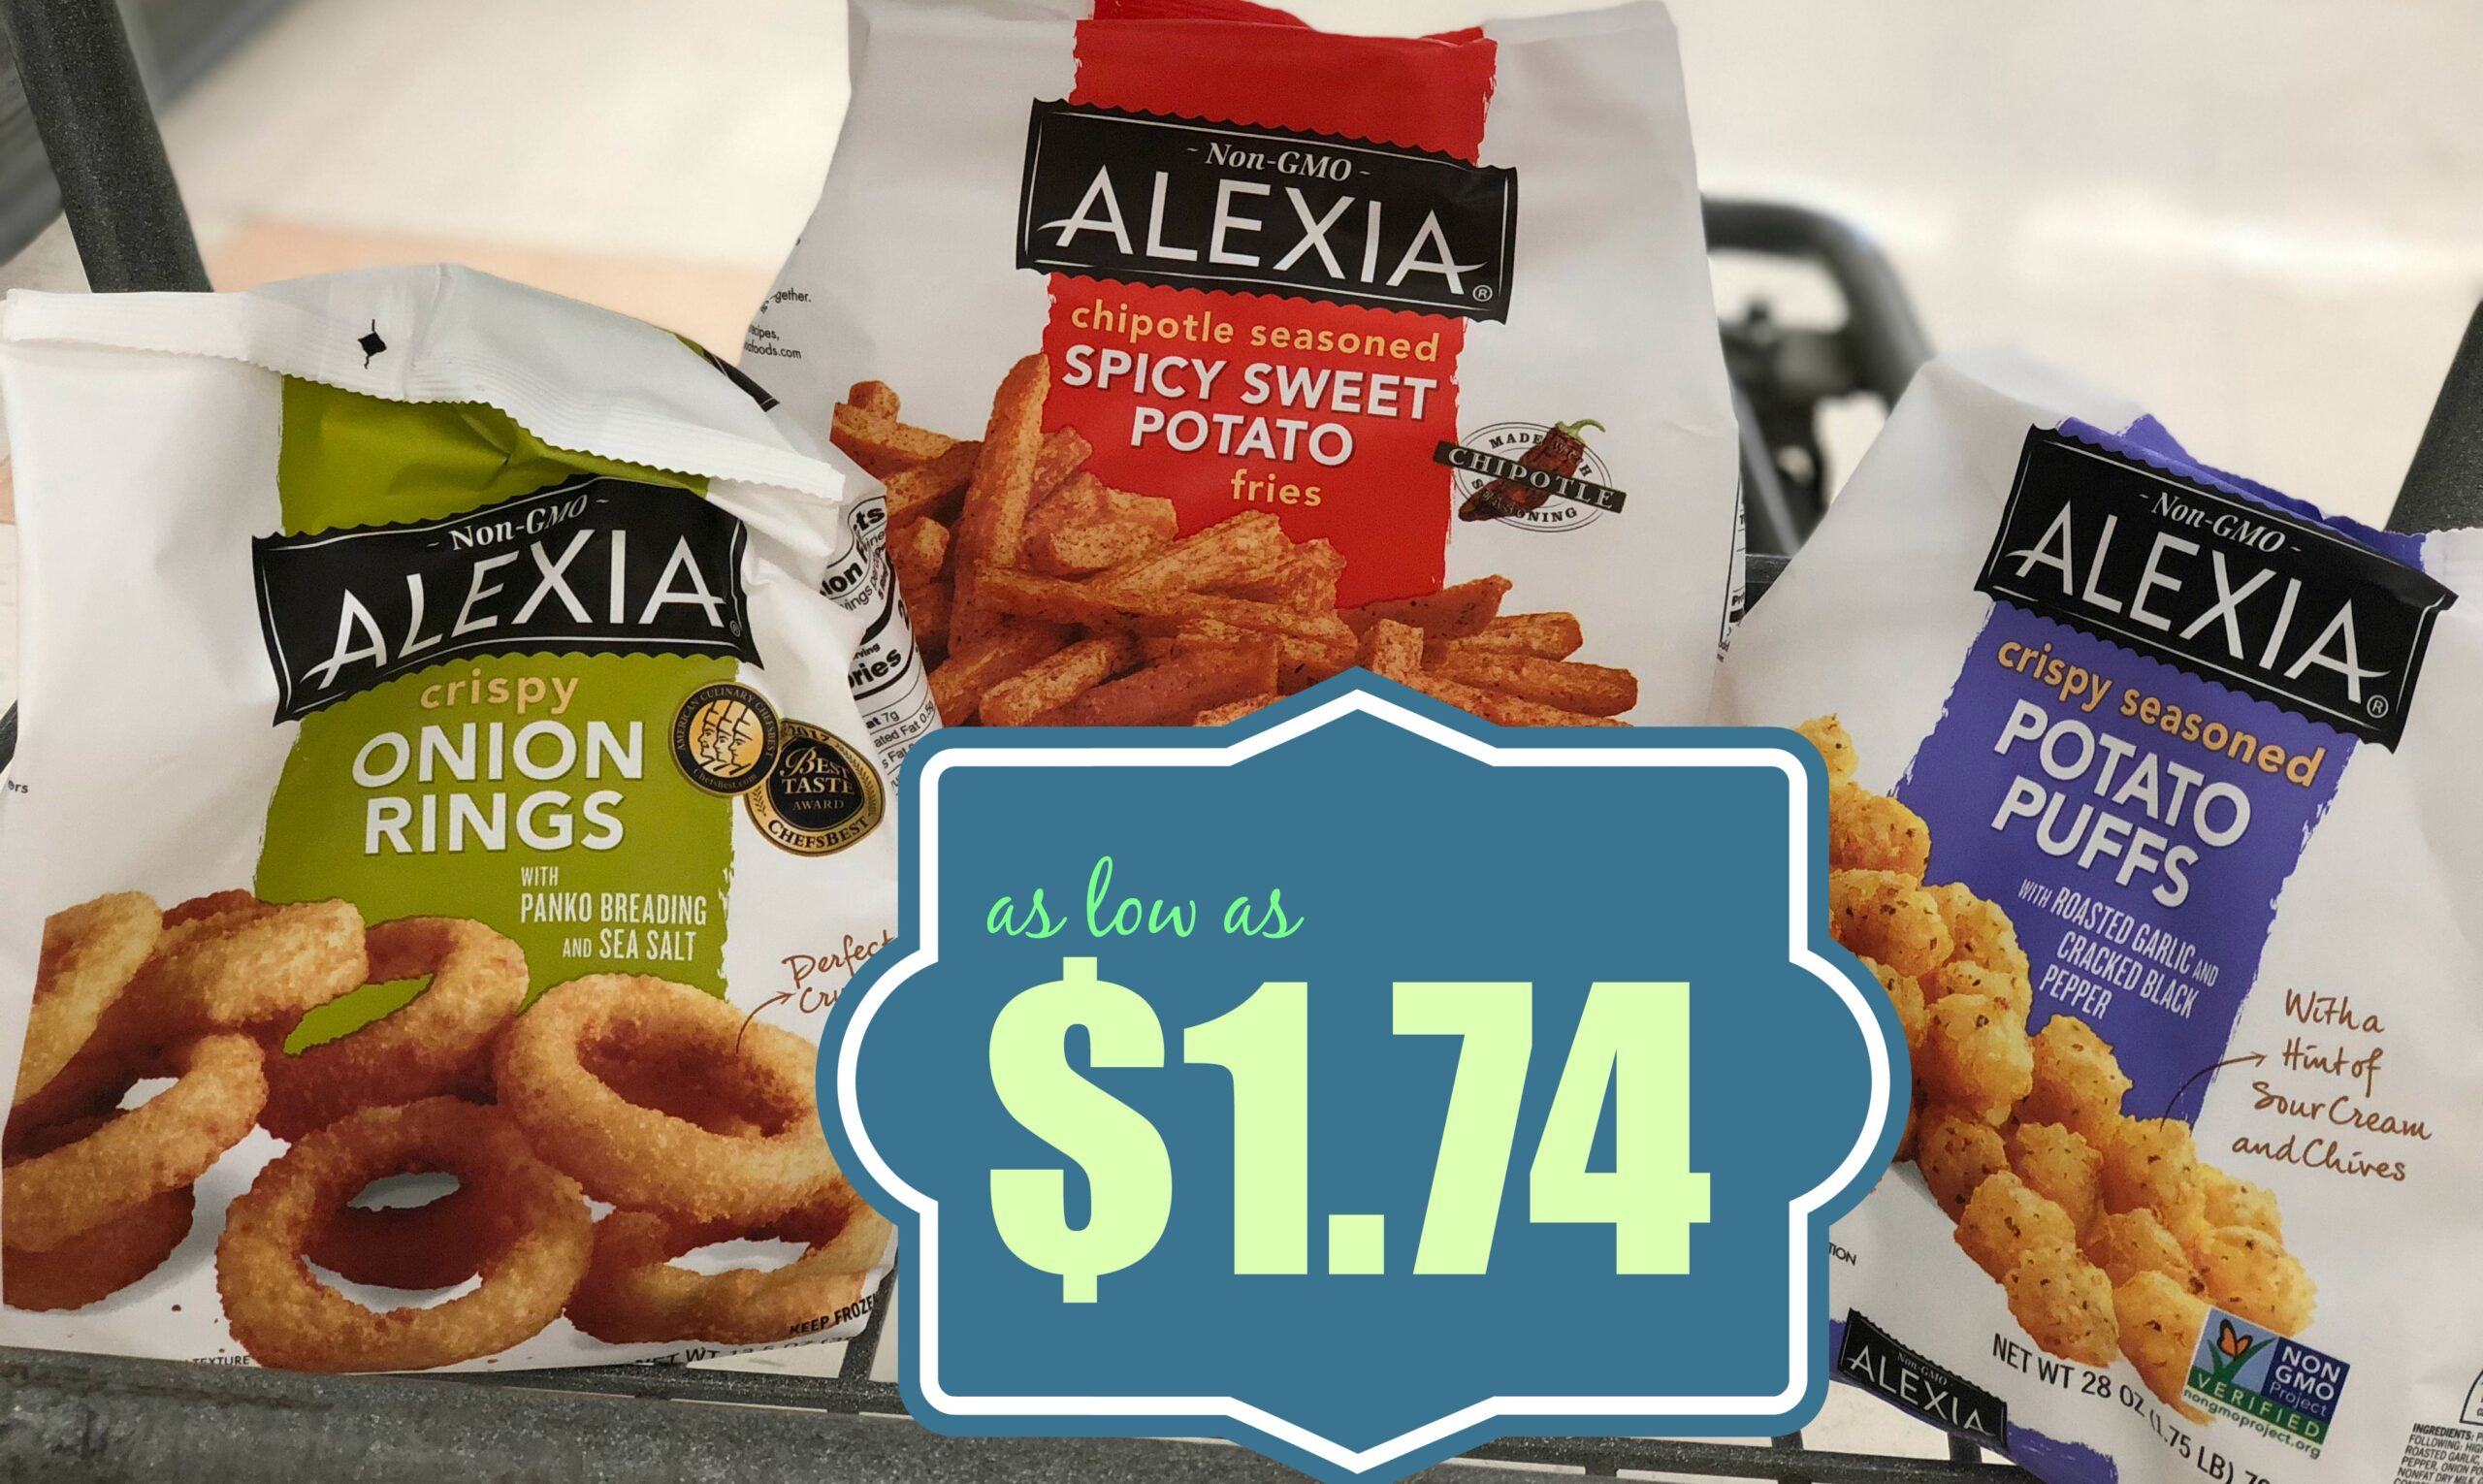 How to make Alexia Crispy Onion Rings in the air fryer – Air Fry Guide